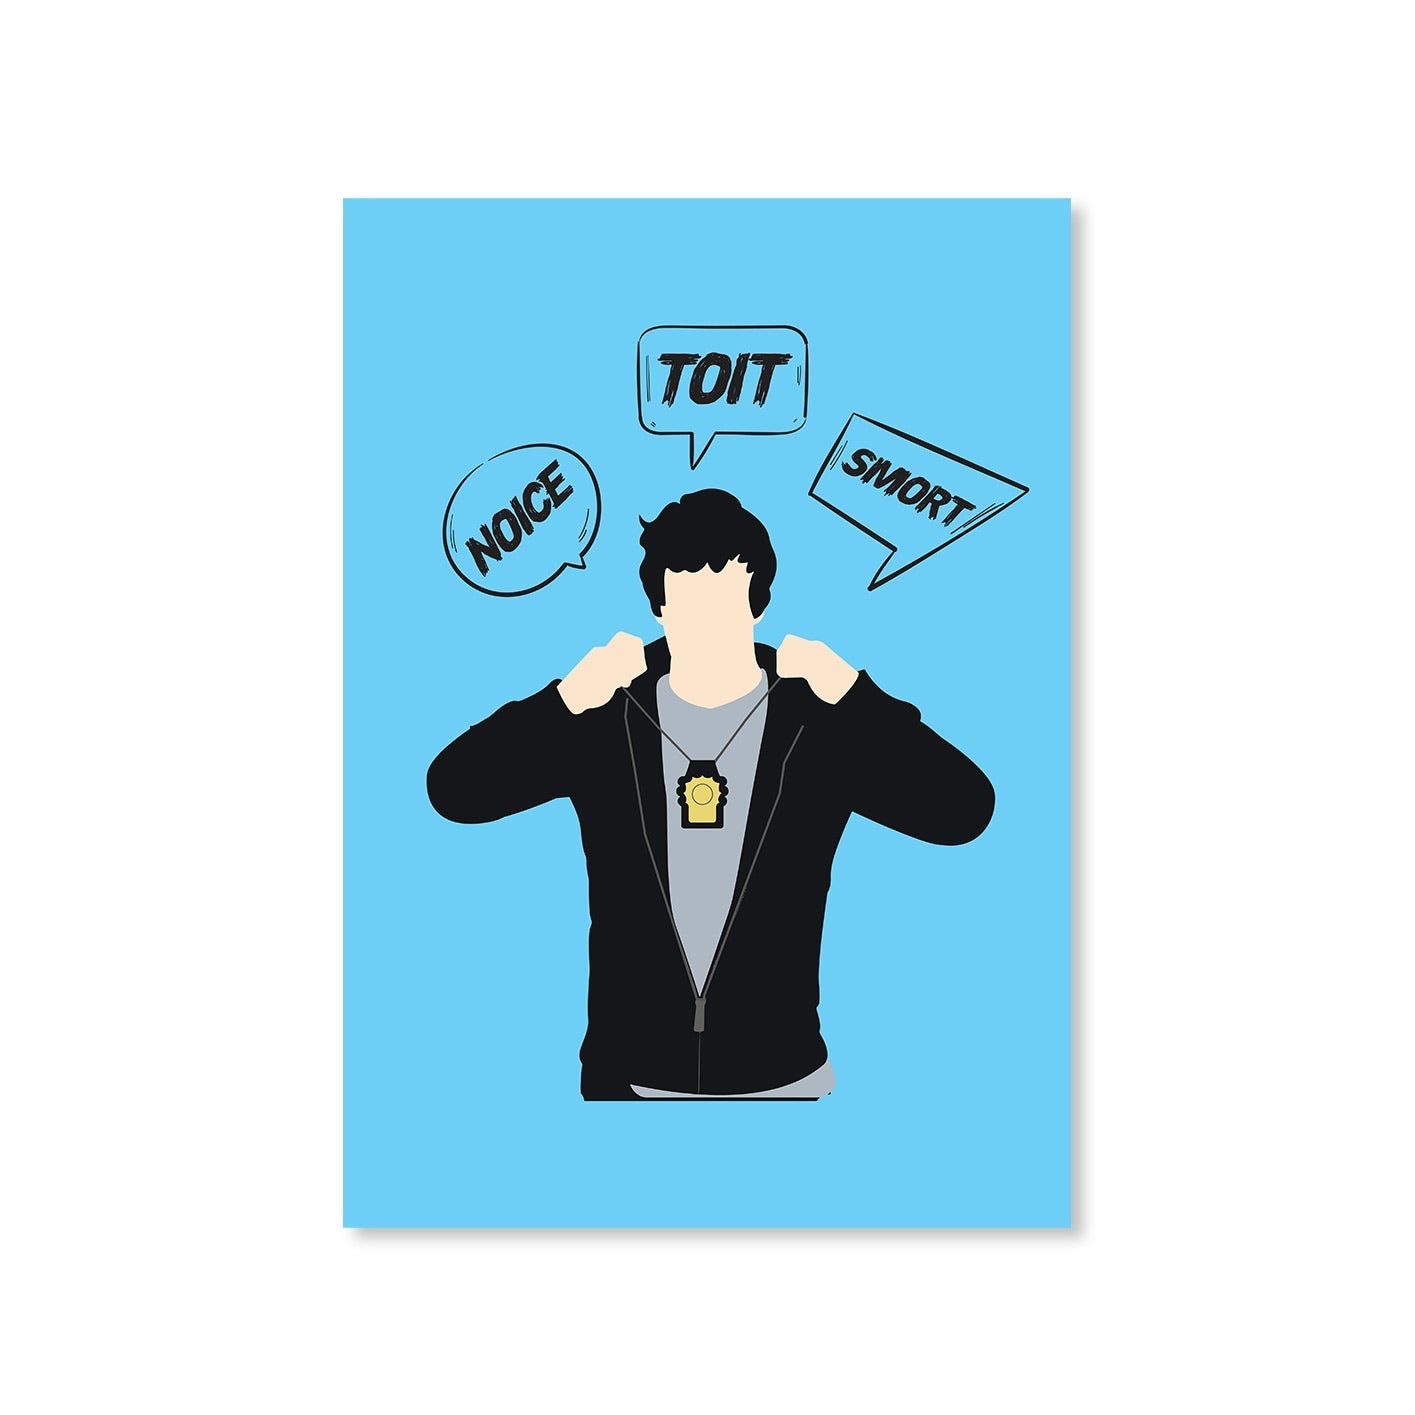 brooklyn nine-nine noice toit smort poster wall art buy online united states of america usa the banyan tee tbt a4 detective jake peralta terry charles boyle gina linetti andy samberg merchandise clothing acceessories